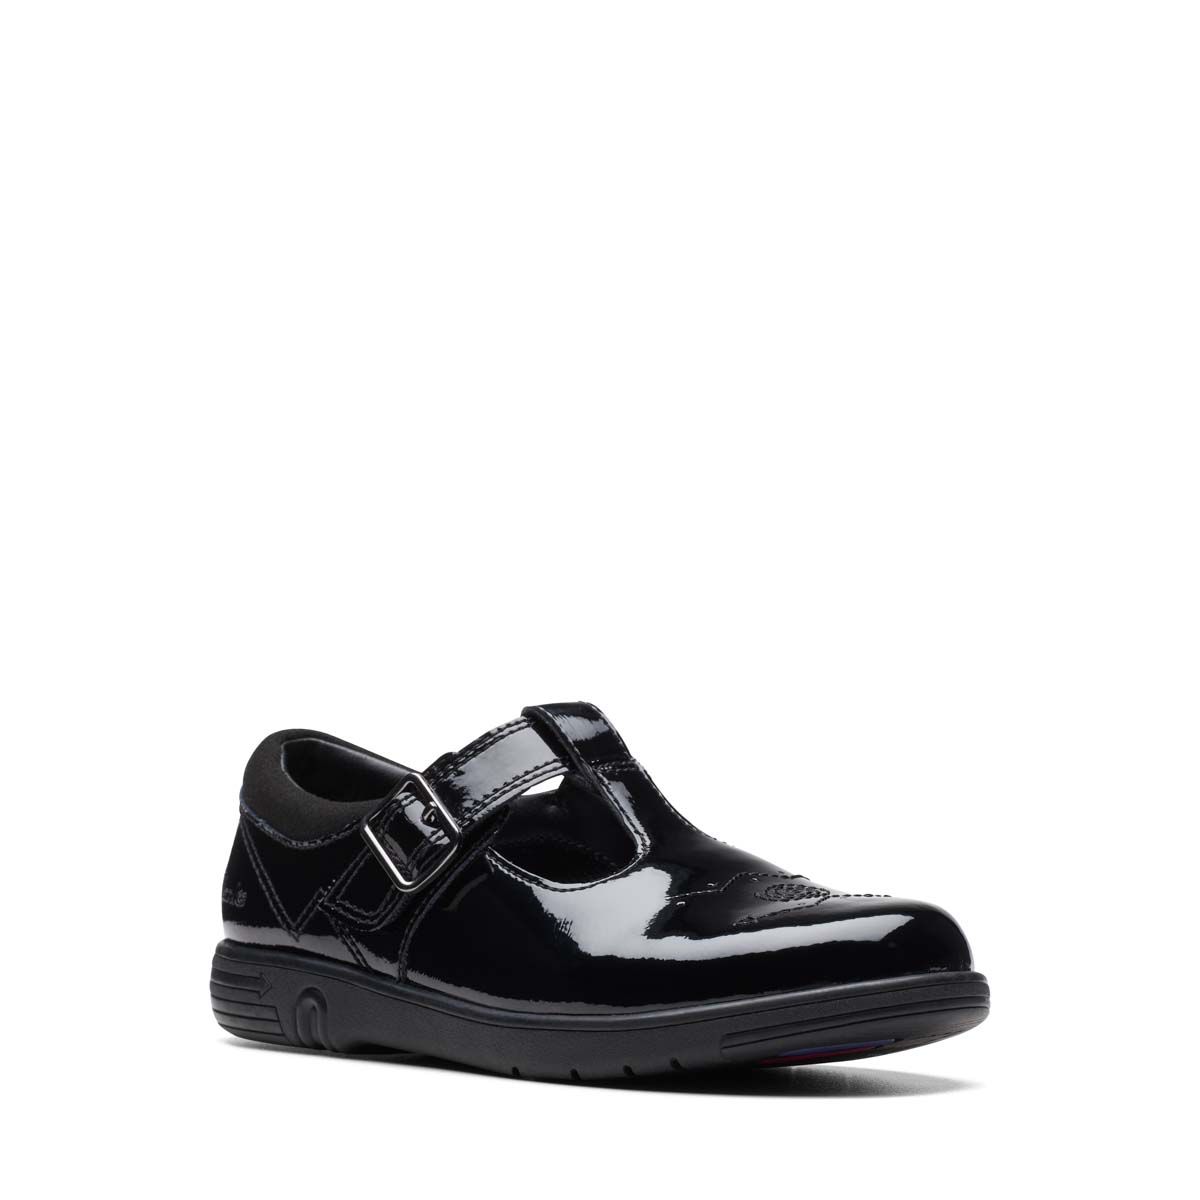 Clarks Jazzy Tap T Bar Black Patent Kids Girls School Shoes 753076F In Size 11 In Plain Black Patent F Width Fitting Regular Fit For School For kids